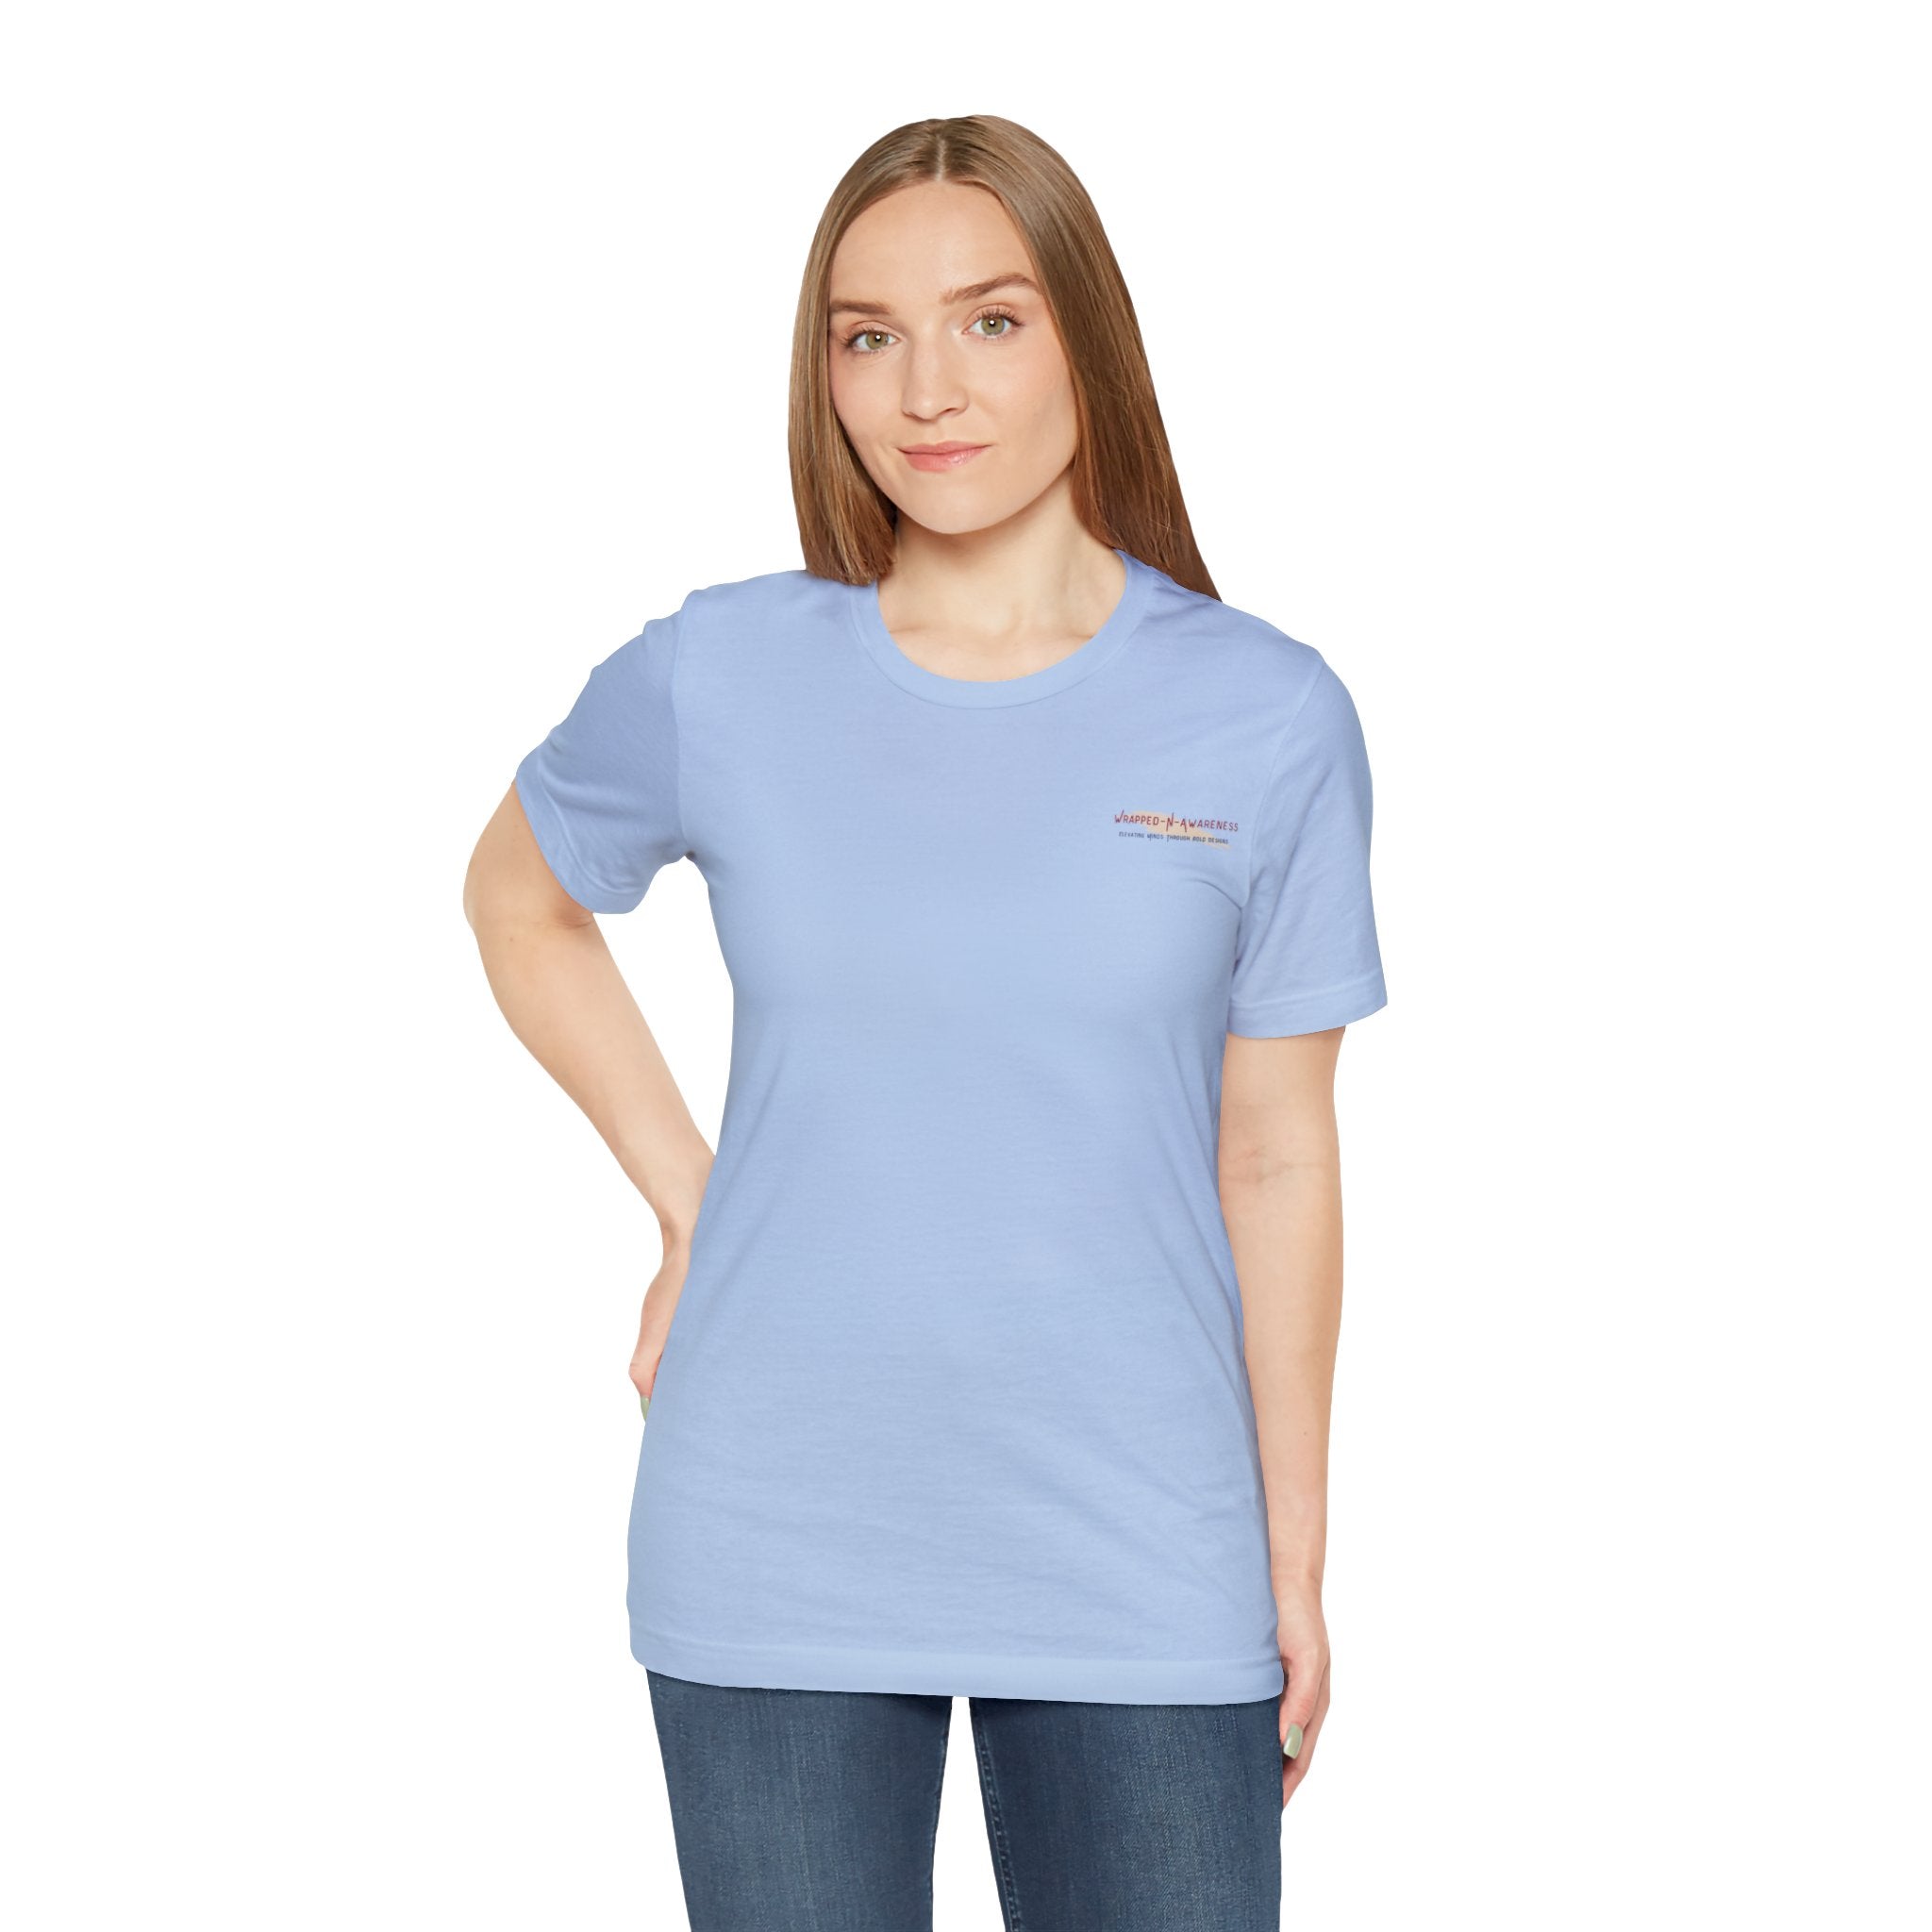 Embrace Self-Care Jersey Tee - Bella+Canvas 3001 Heather Mauve Airlume Cotton Bella+Canvas 3001 Crew Neckline Jersey Short Sleeve Lightweight Fabric Mental Health Support Retail Fit Tear-away Label Tee Unisex Tee T-Shirt 3838345701268628390_2048 Printify